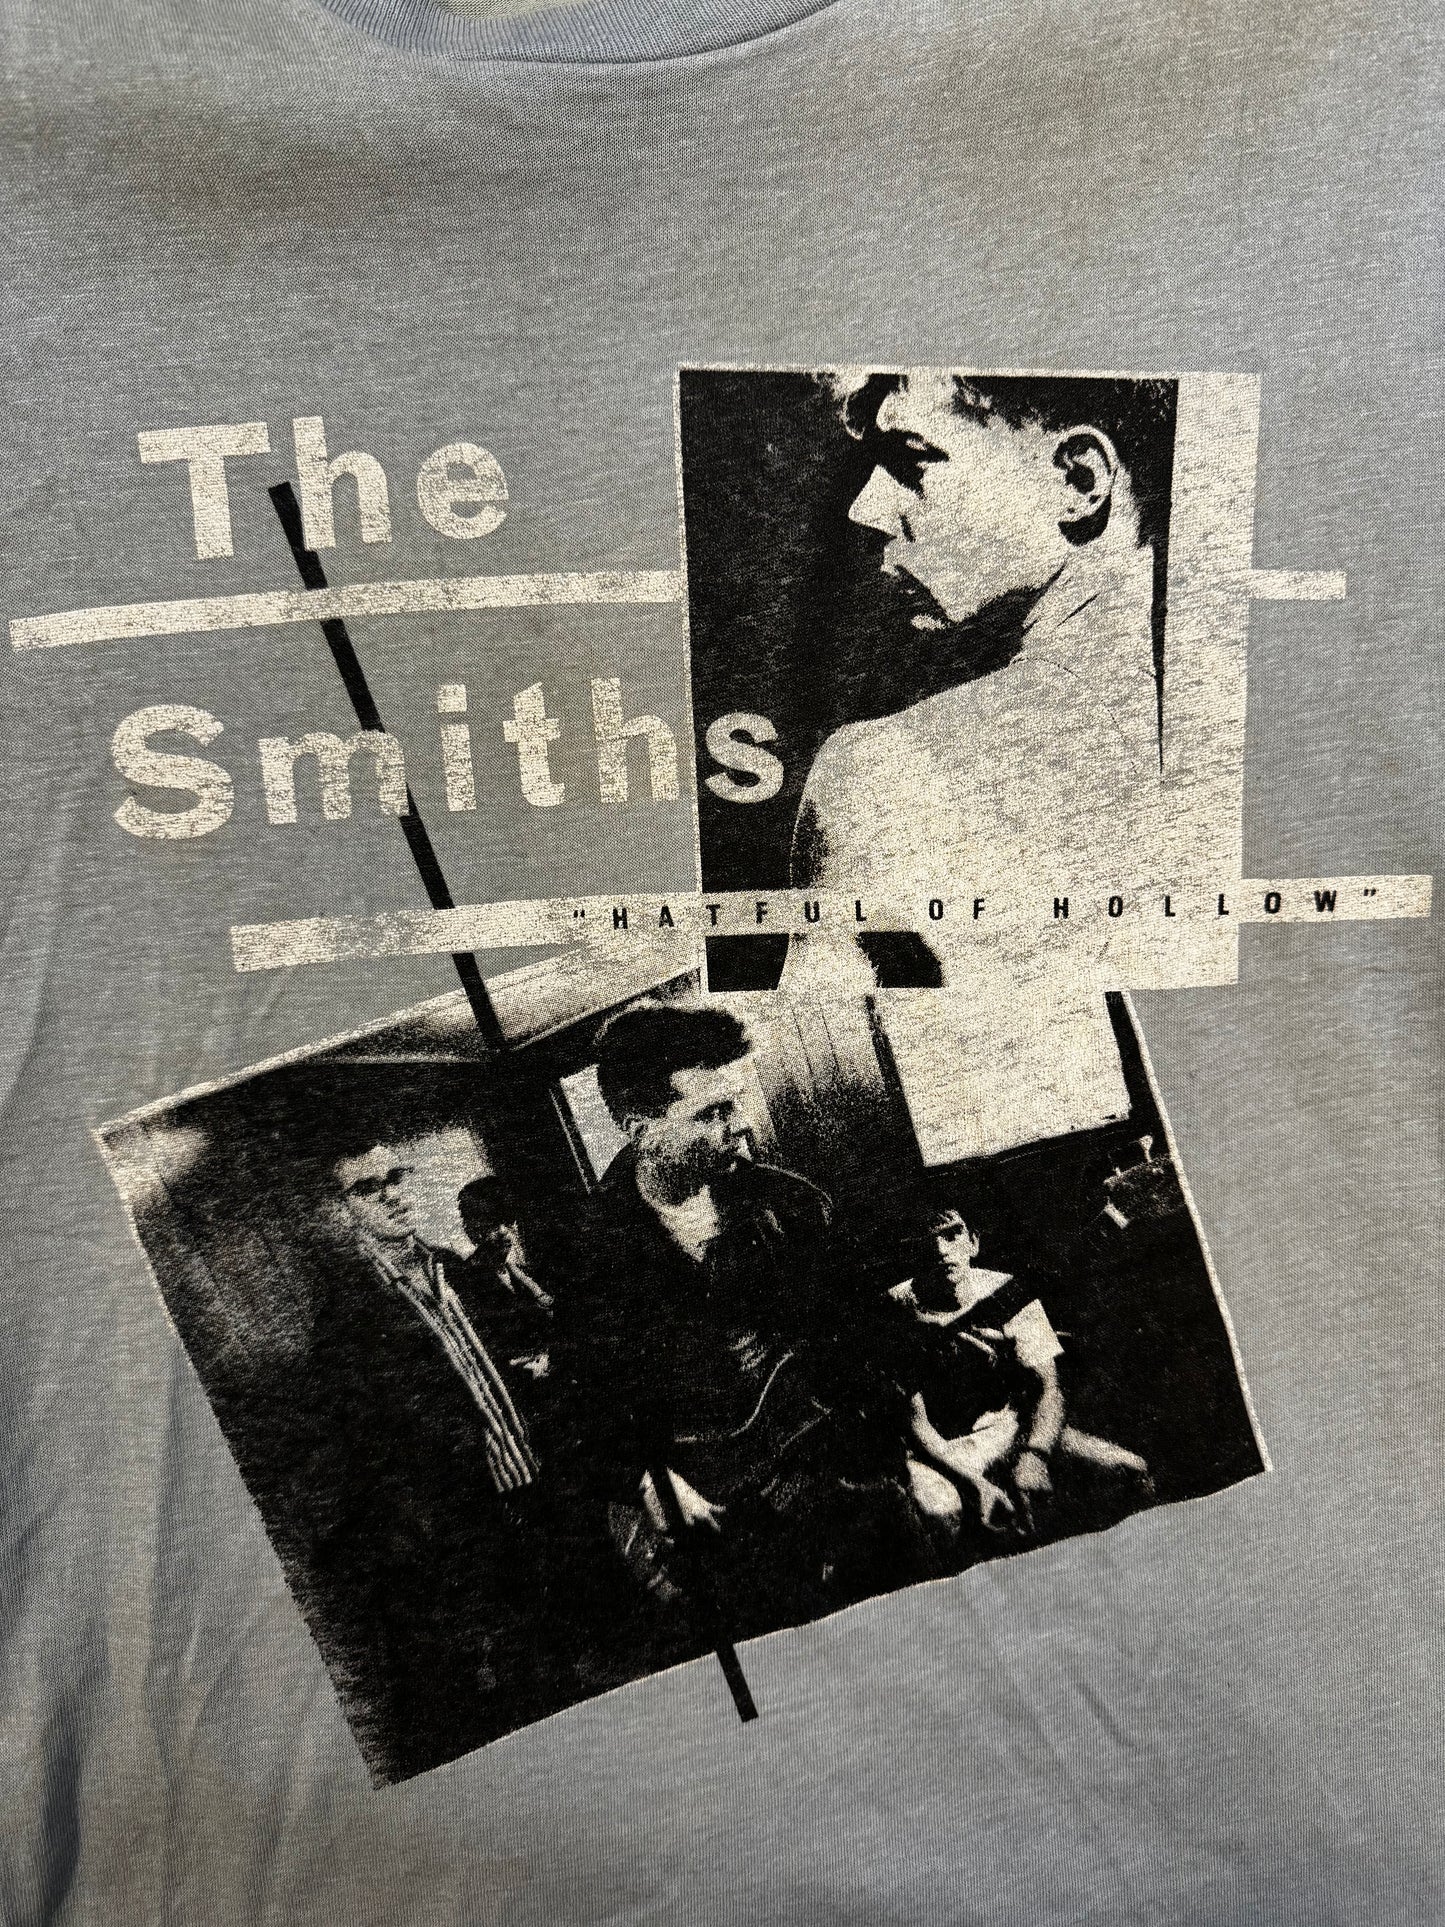 1984 The Smiths Hatful of Hollow Vintage T Shirt